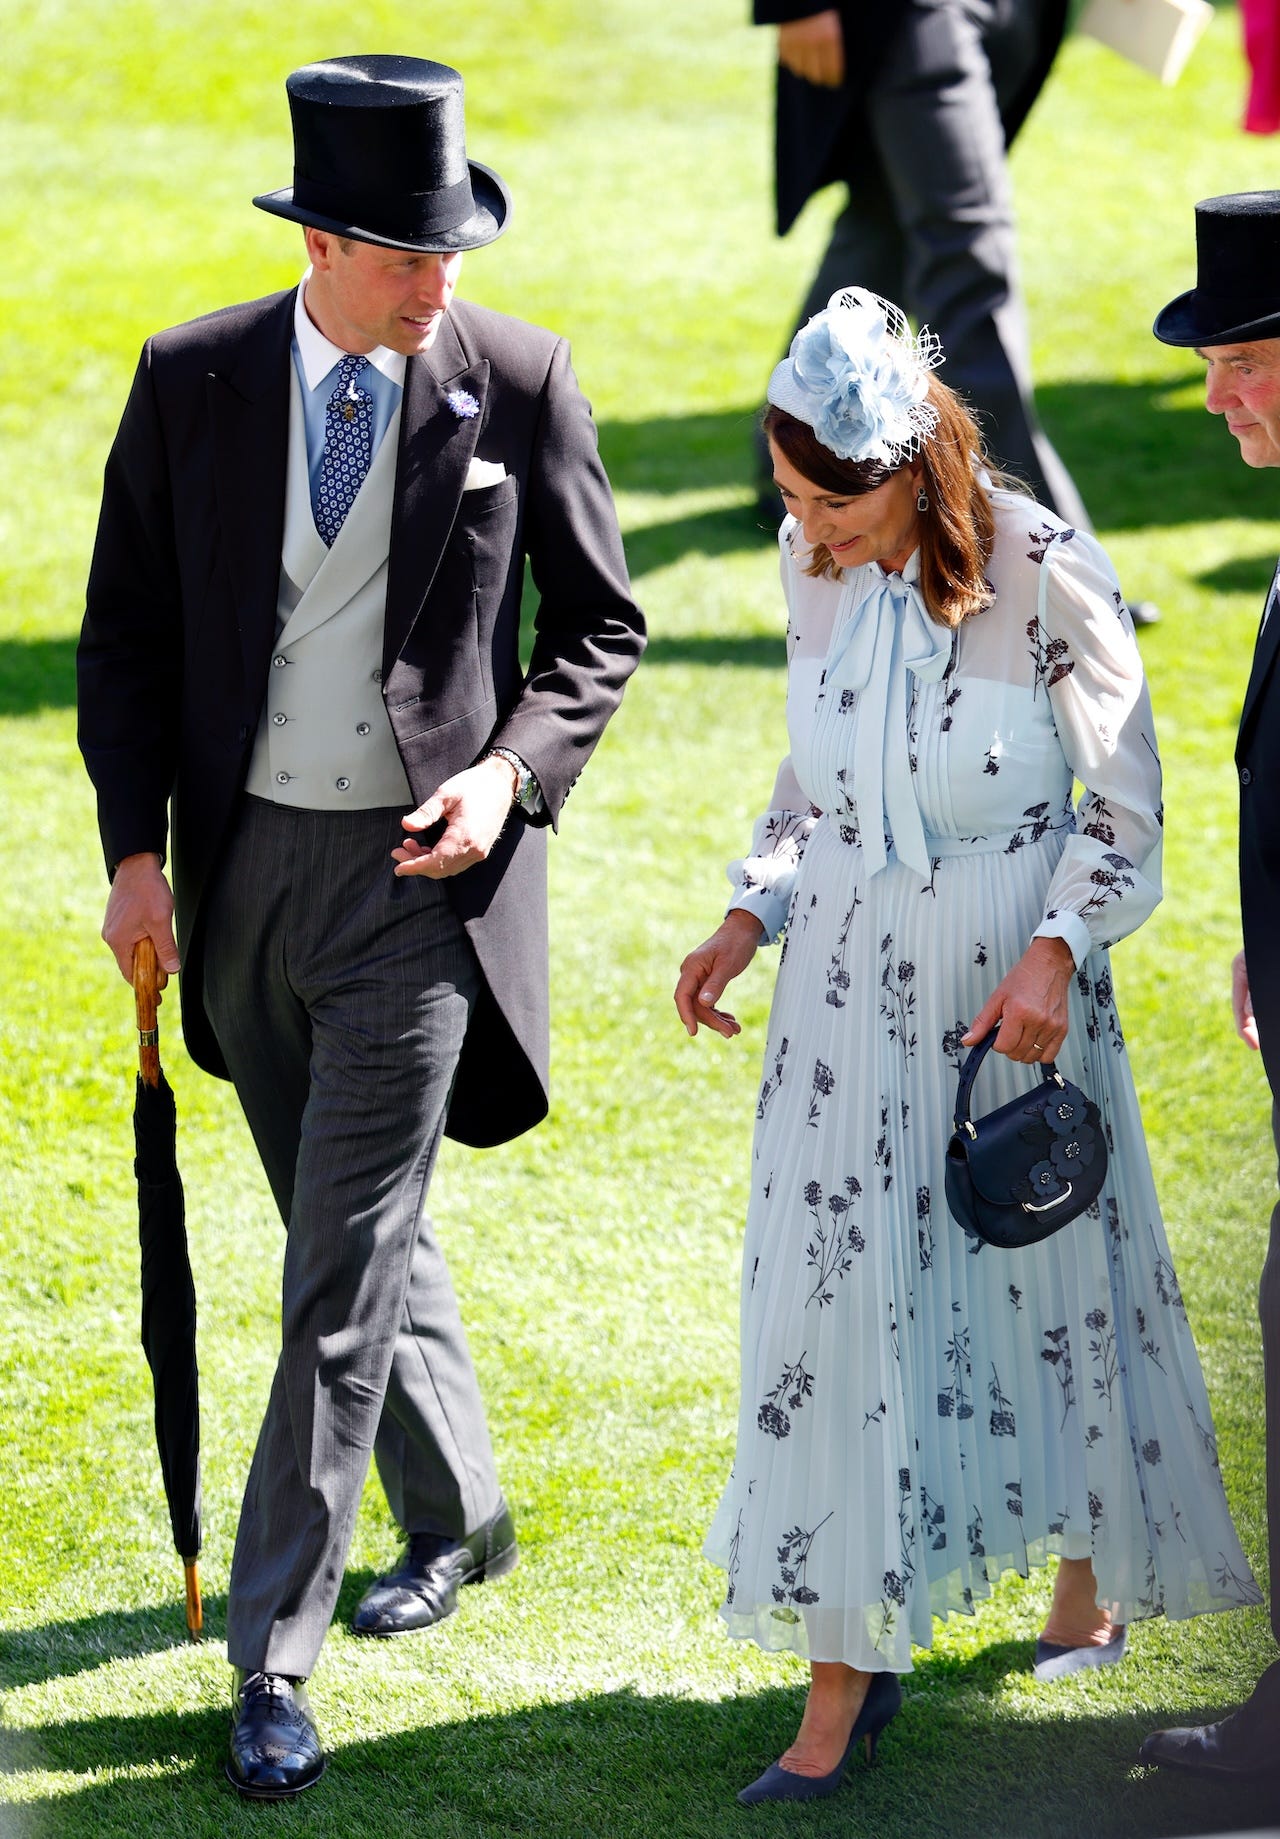 <p>Following the dress code to a tee, William, 41, arrived in a black morning suit jacket, gray pants, and a black top hat. He paired it with a double-breasted waistcoat layered over a collared shirt and a blue patterned tie. </p><p>Although he arrived without <a href="https://www.businessinsider.com/kate-middleton-surgery-public-absence-what-to-know-2024-2">Kate Middleton</a>, who is undergoing cancer treatment but <a href="https://www.businessinsider.com/kate-middleton-trooping-the-colour-first-event-since-cancer-announcement-2024-6">plans to attend several royal engagements throughout the summer</a>, William wasn't alone at the races. Aside from the company of his royal family members, he was photographed smiling and chatting with his in-laws, Michael and <a href="https://www.businessinsider.com/the-crown-carole-middleton-kris-jenner-comparison-royal-experts-2023-12">Carole Middleton</a>. </p>